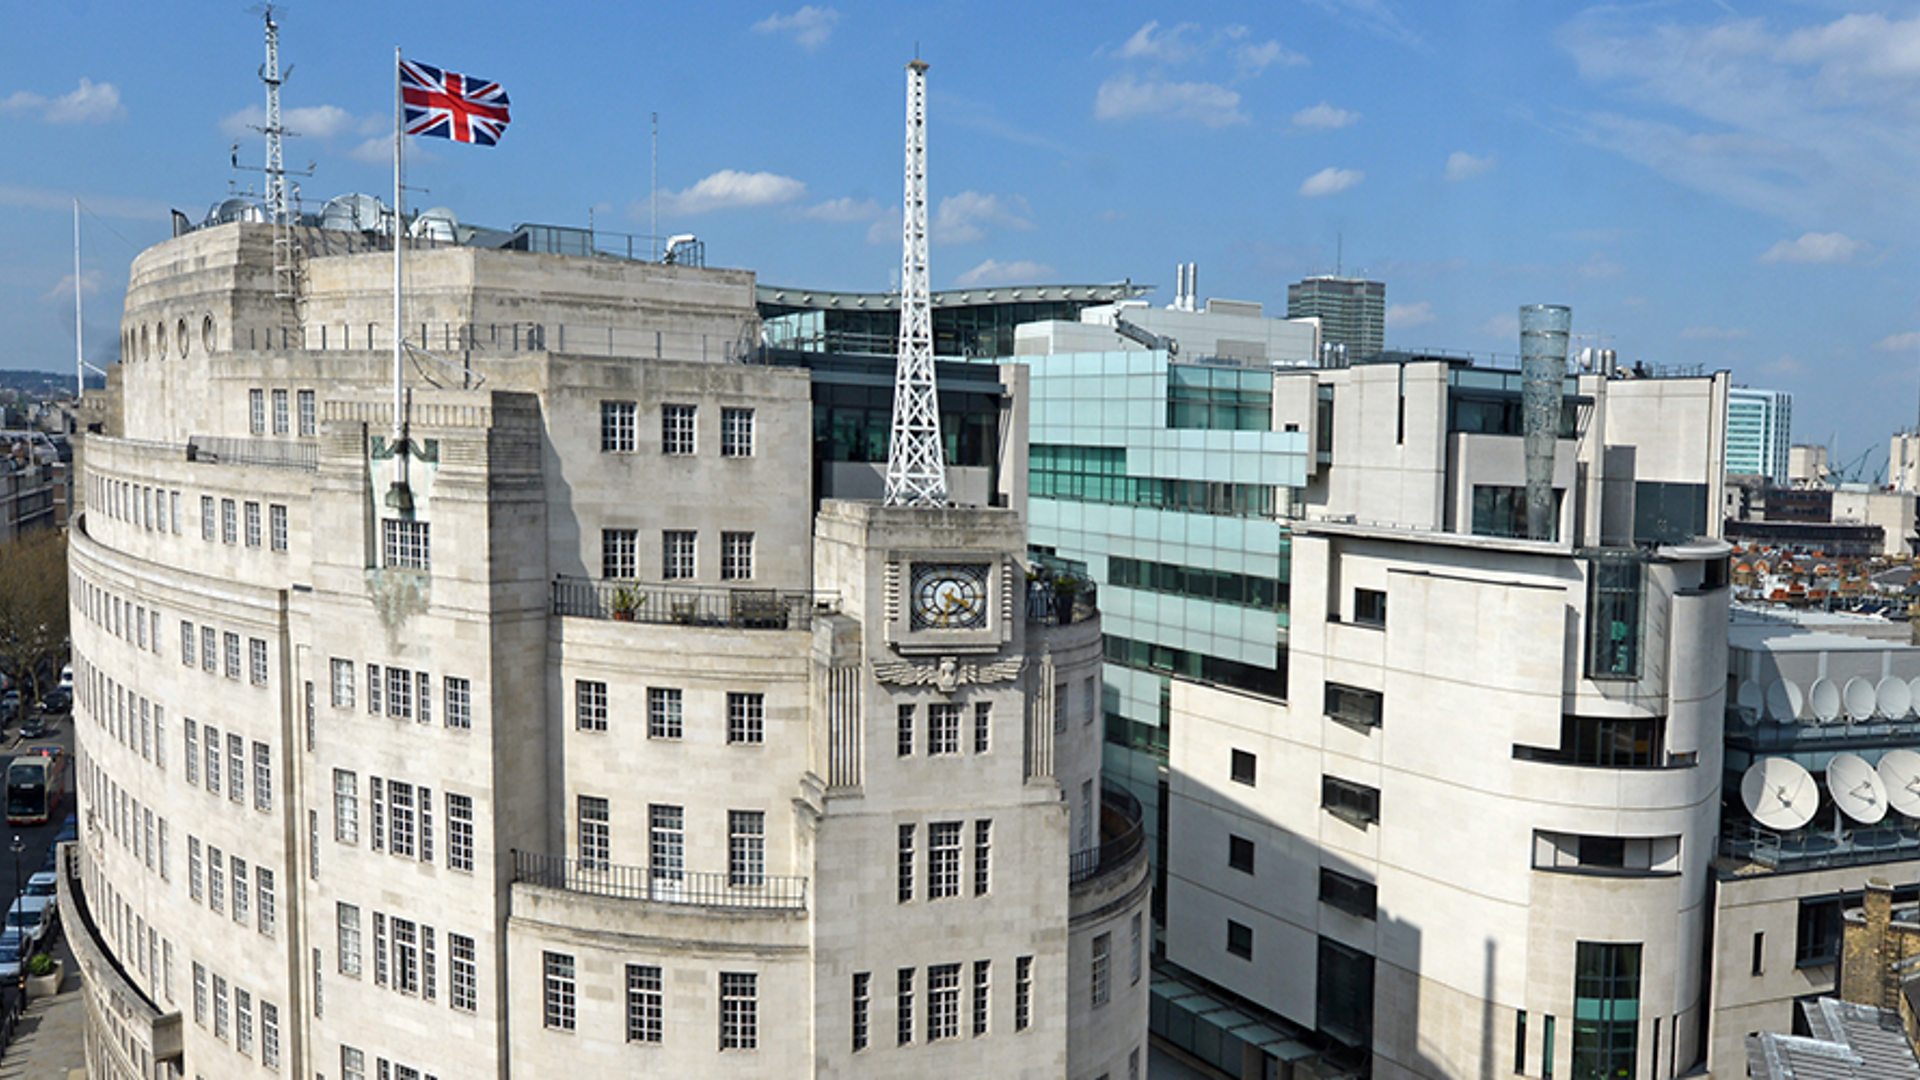 BBC - London - Places - A new home for Central St Martins